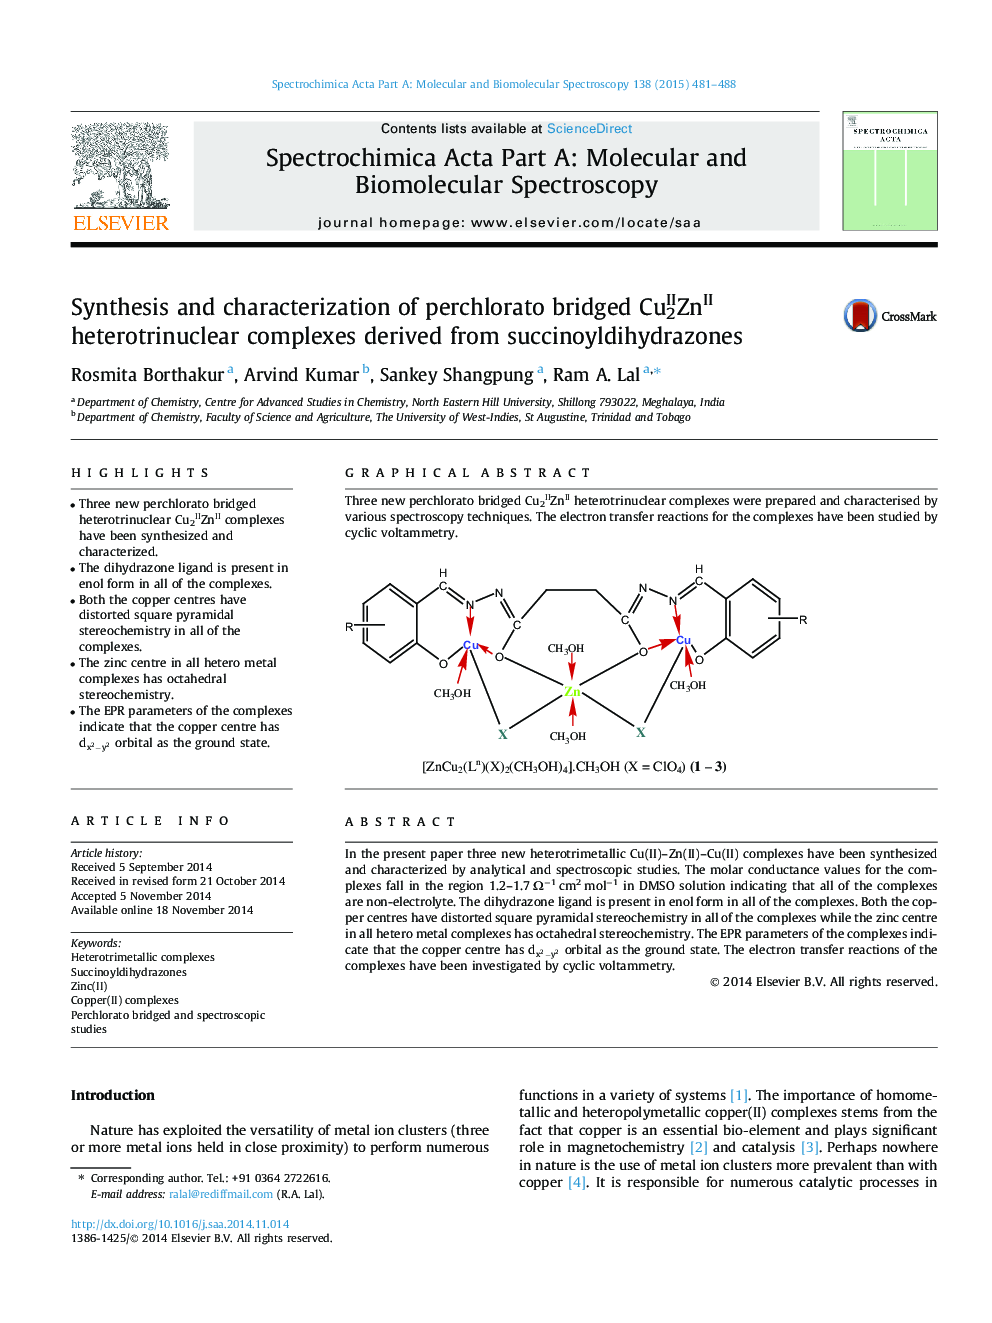 Synthesis and characterization of perchlorato bridged Cu2IIZnII heterotrinuclear complexes derived from succinoyldihydrazones